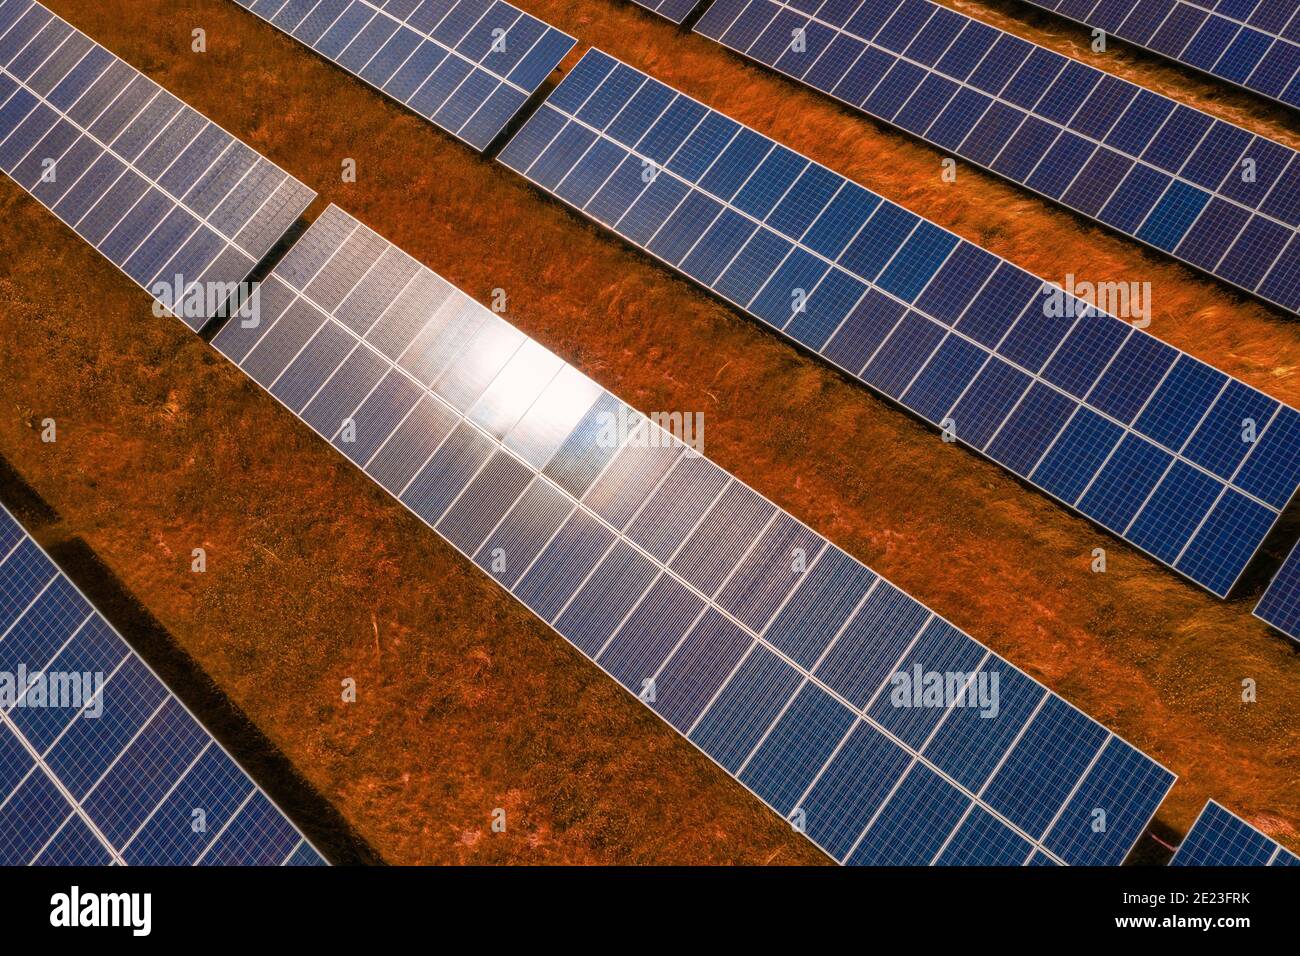 Creative portrayal of solar panel array, Lapeer, Michigan highlights investment in sustainable, renewable energy Stock Photo